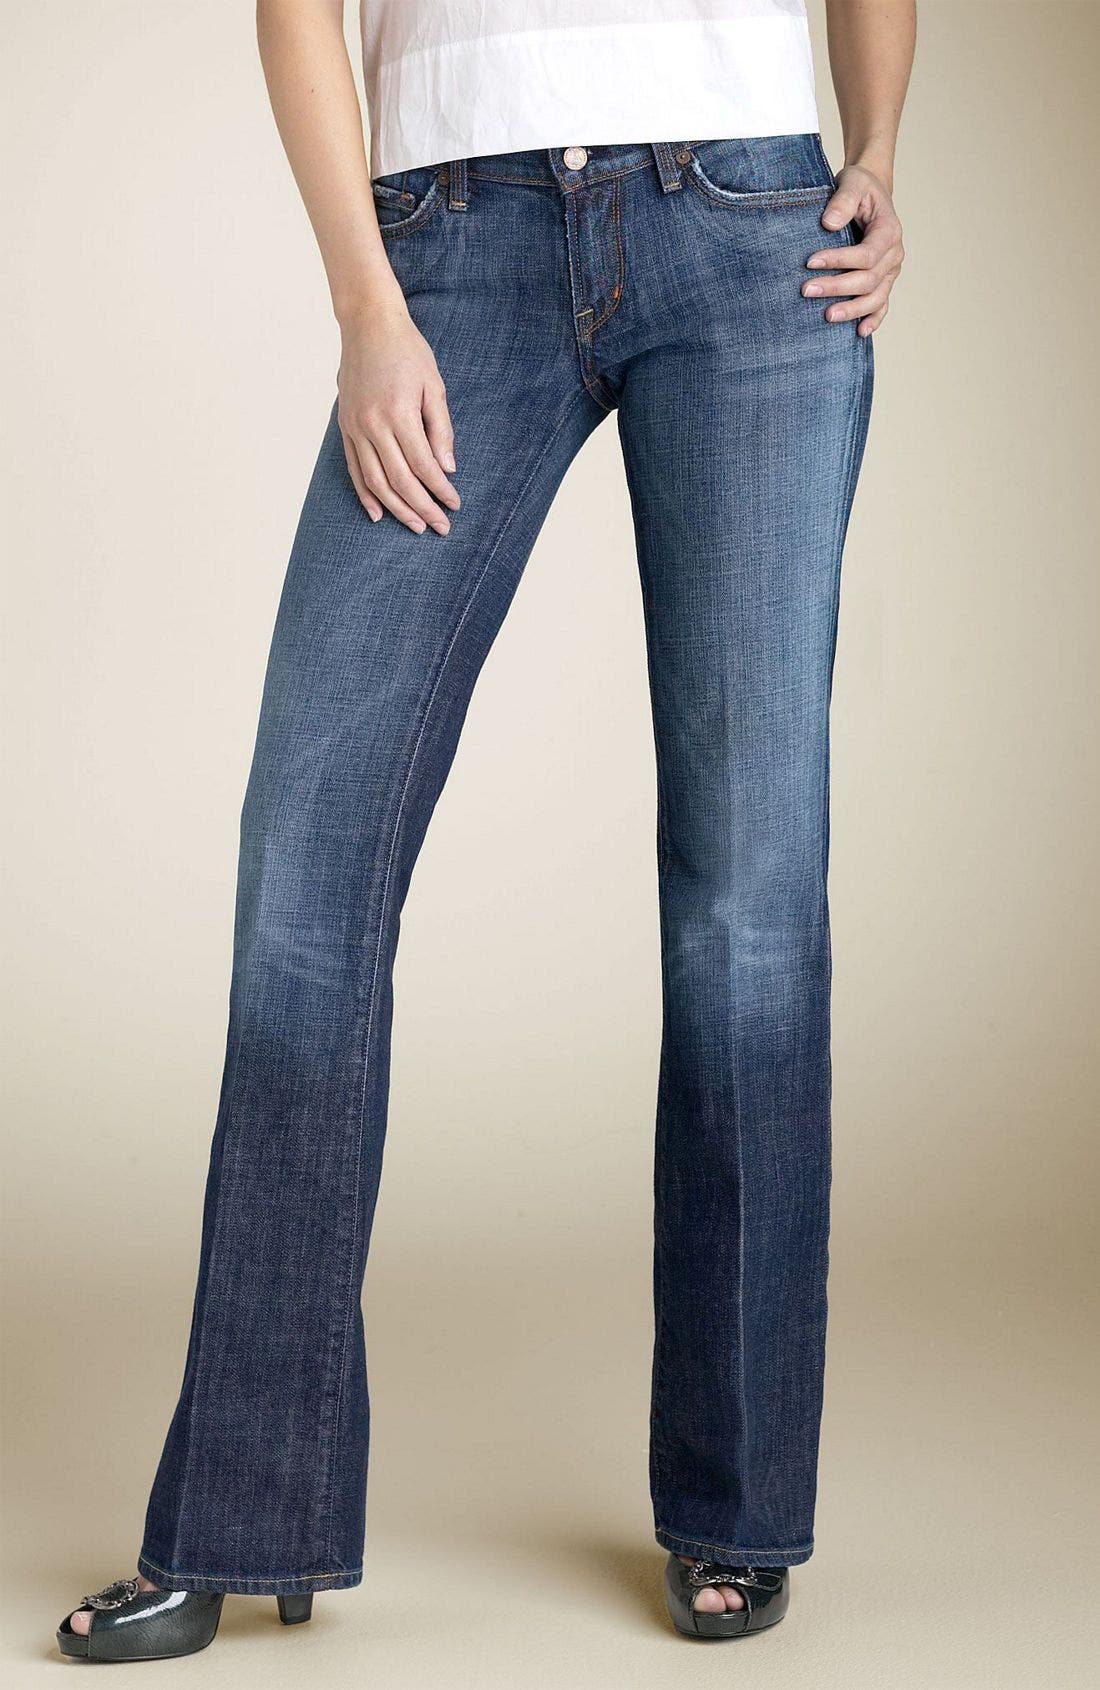 citizens of humanity dita petite bootcut jeans in wonder wash